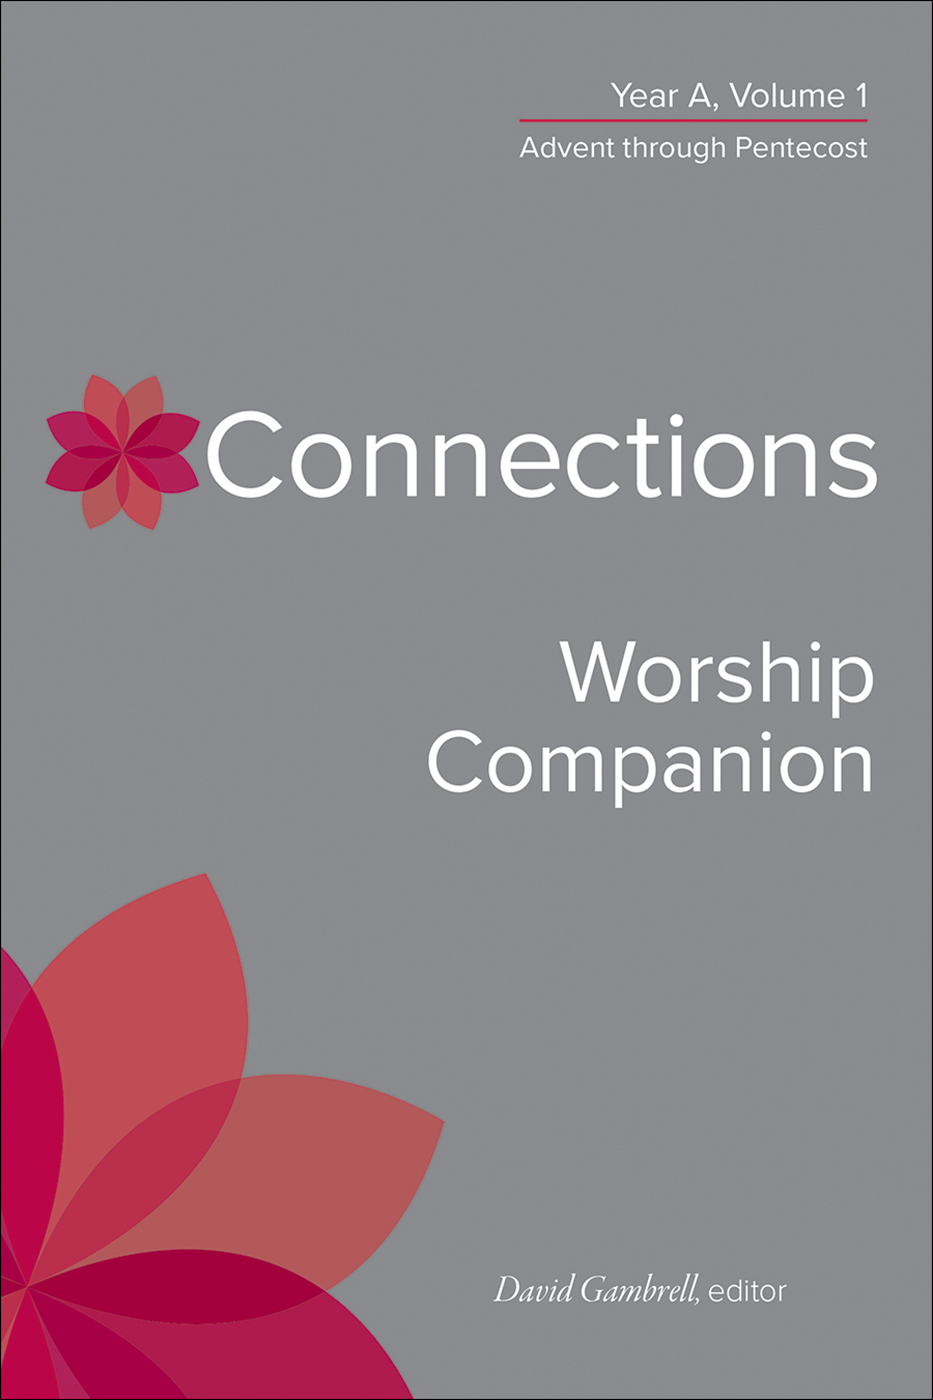 Connections Worship Companion, Year A, Volume 1